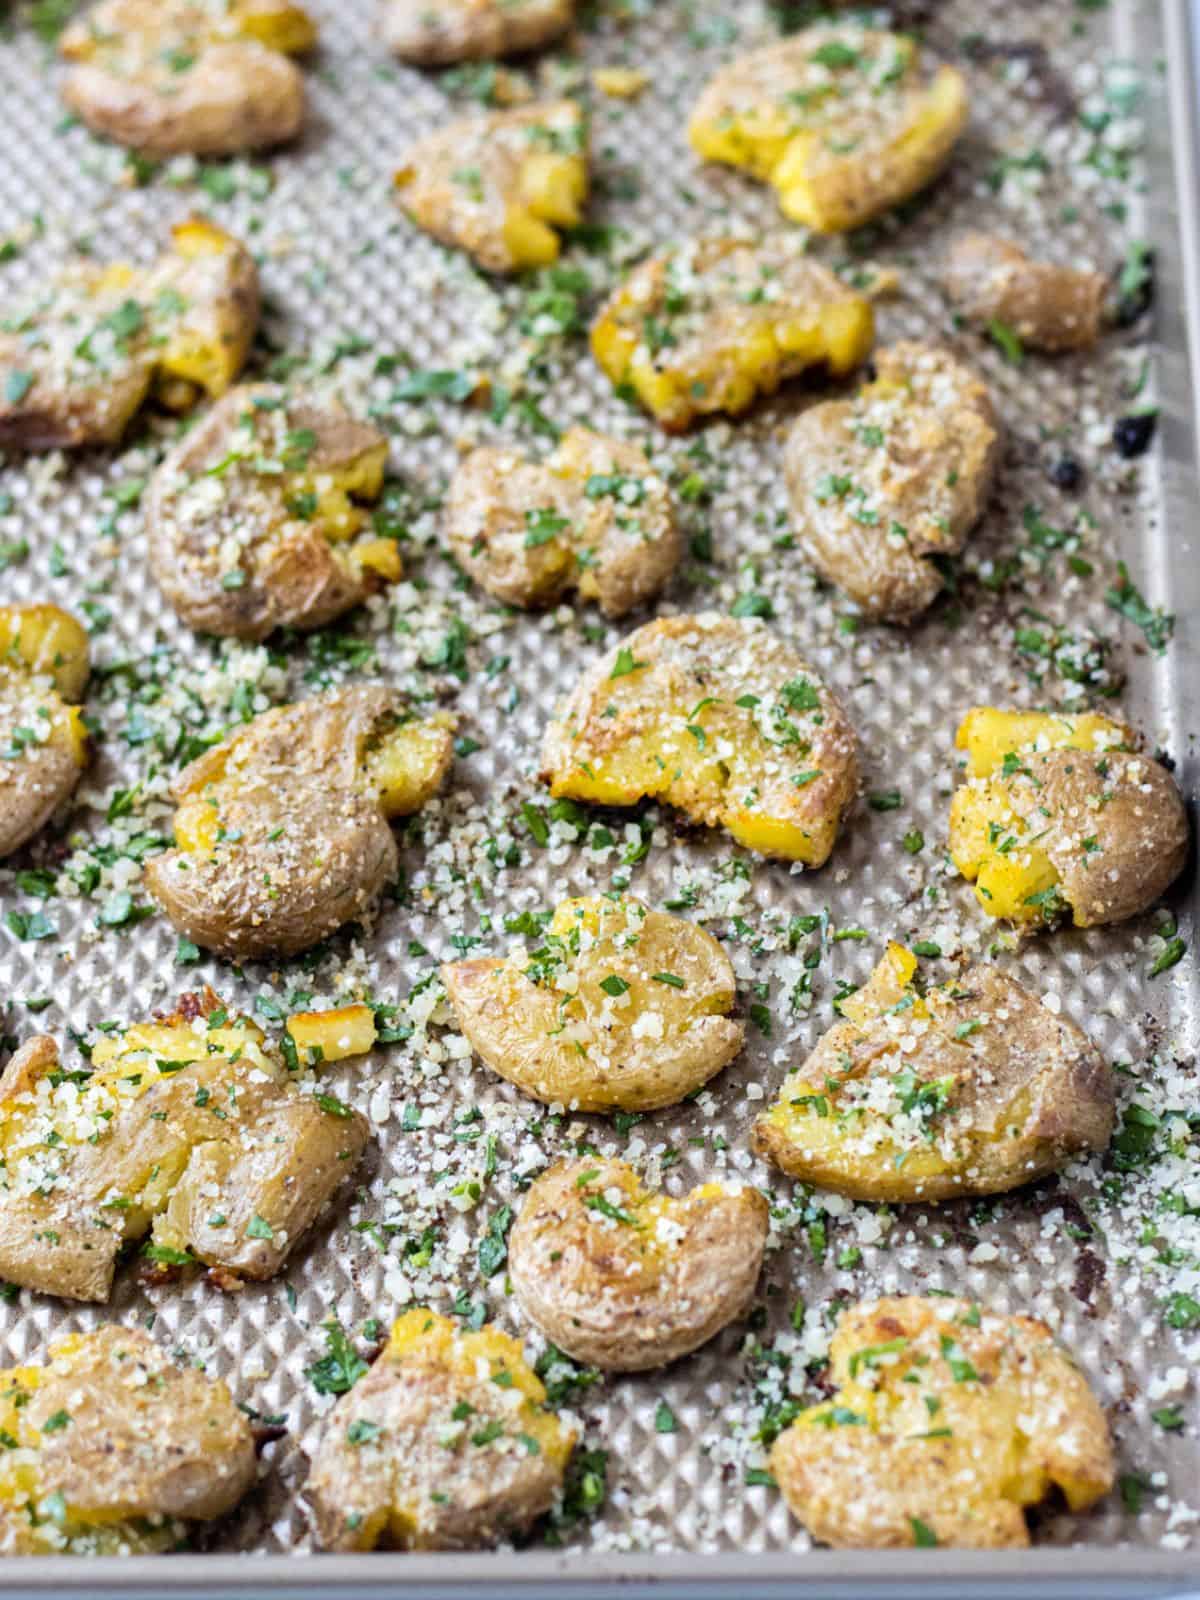 Smashed fingerling potatoes topped with parmesan and parsley on a baking sheet.